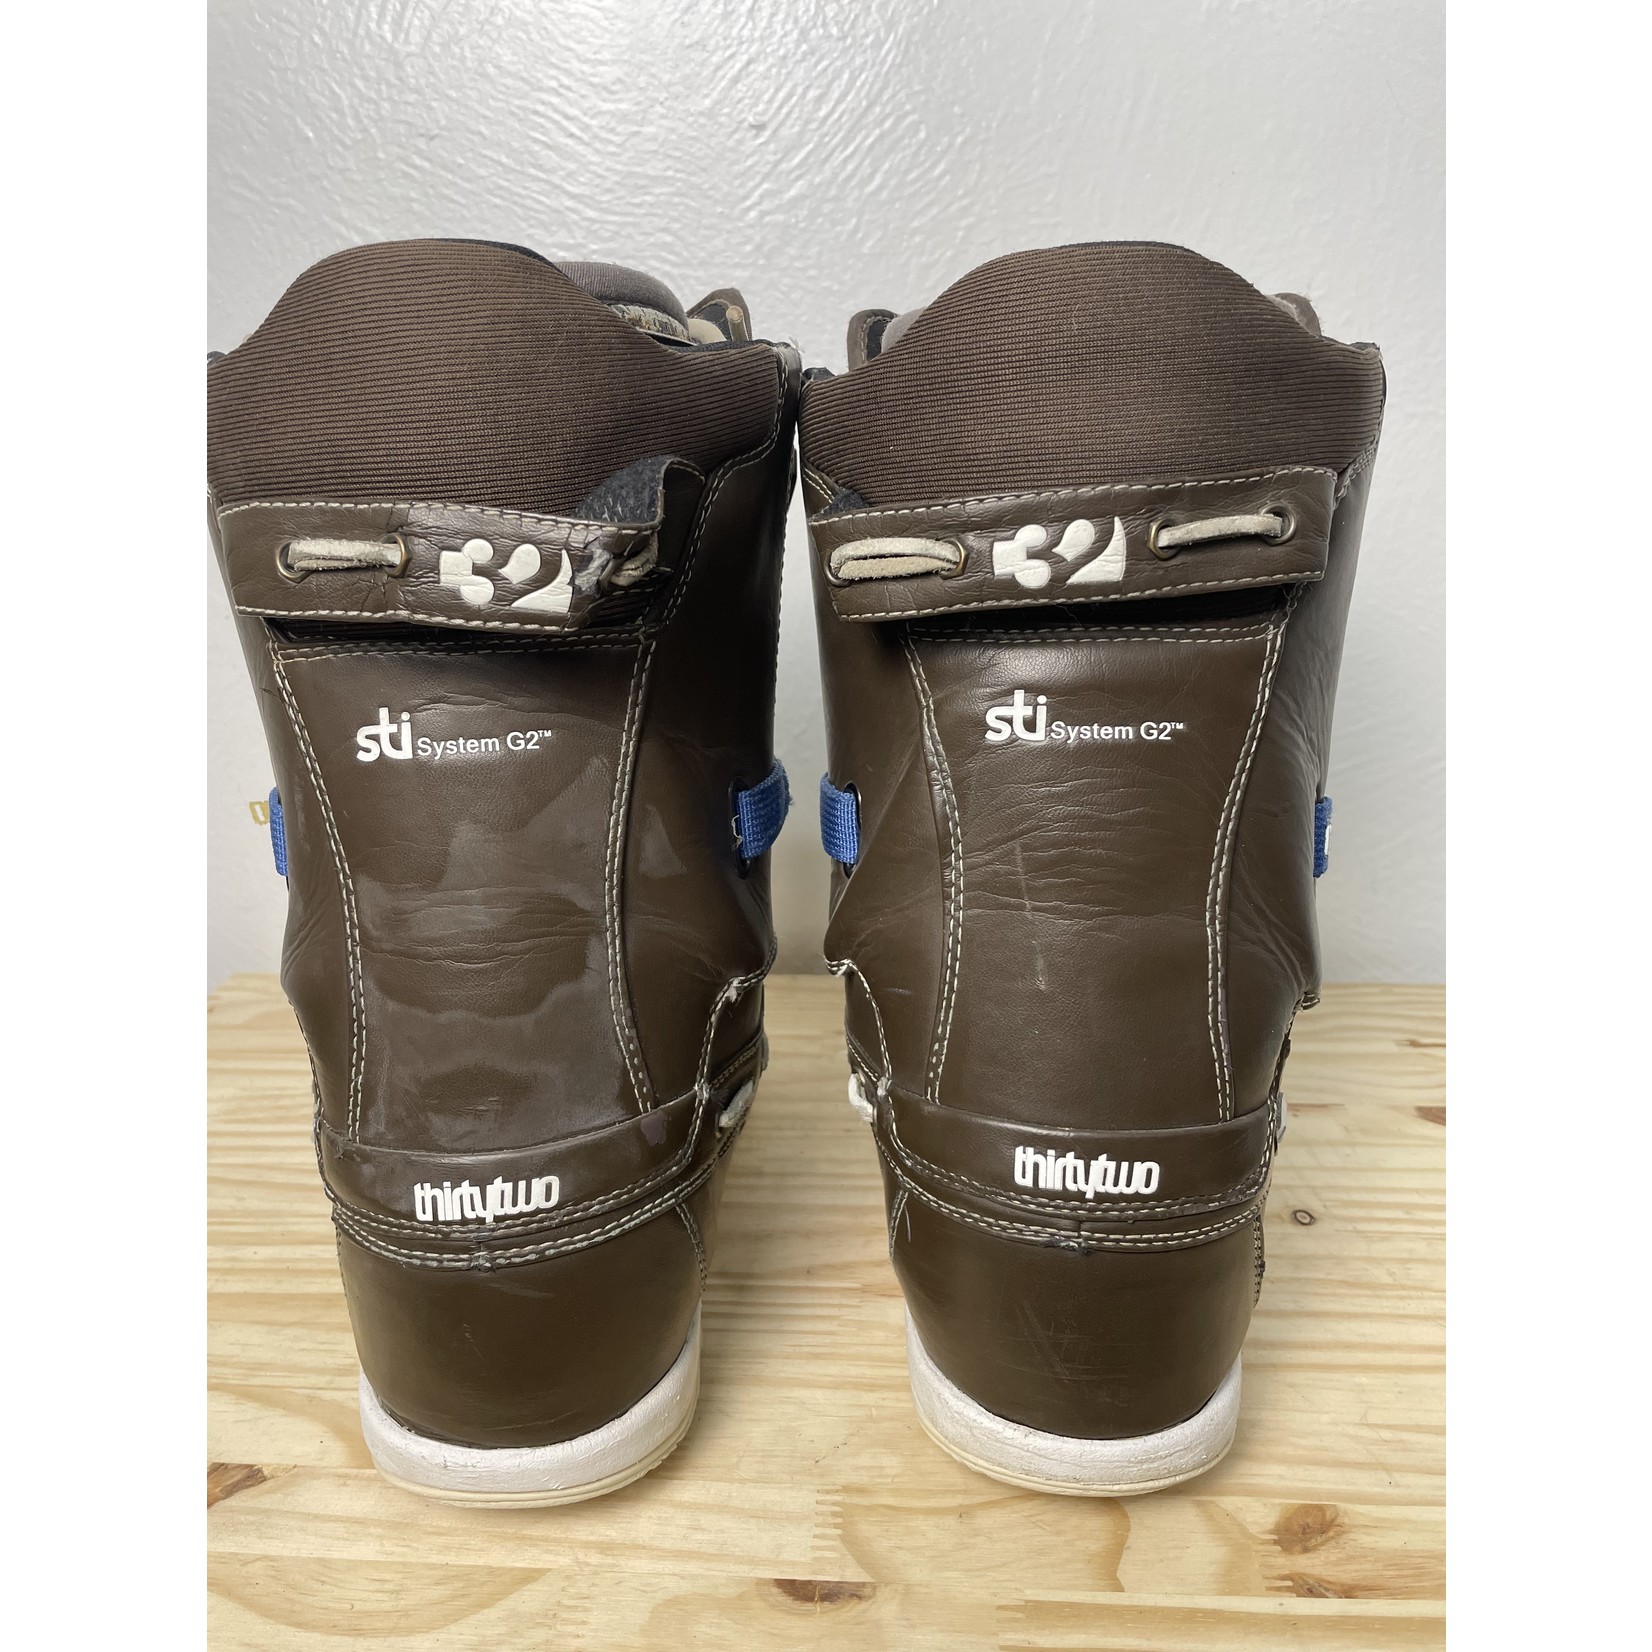 ThirtyTwo ThirtyTwo Broport Snowboard Boots, Size 9.5 MENS